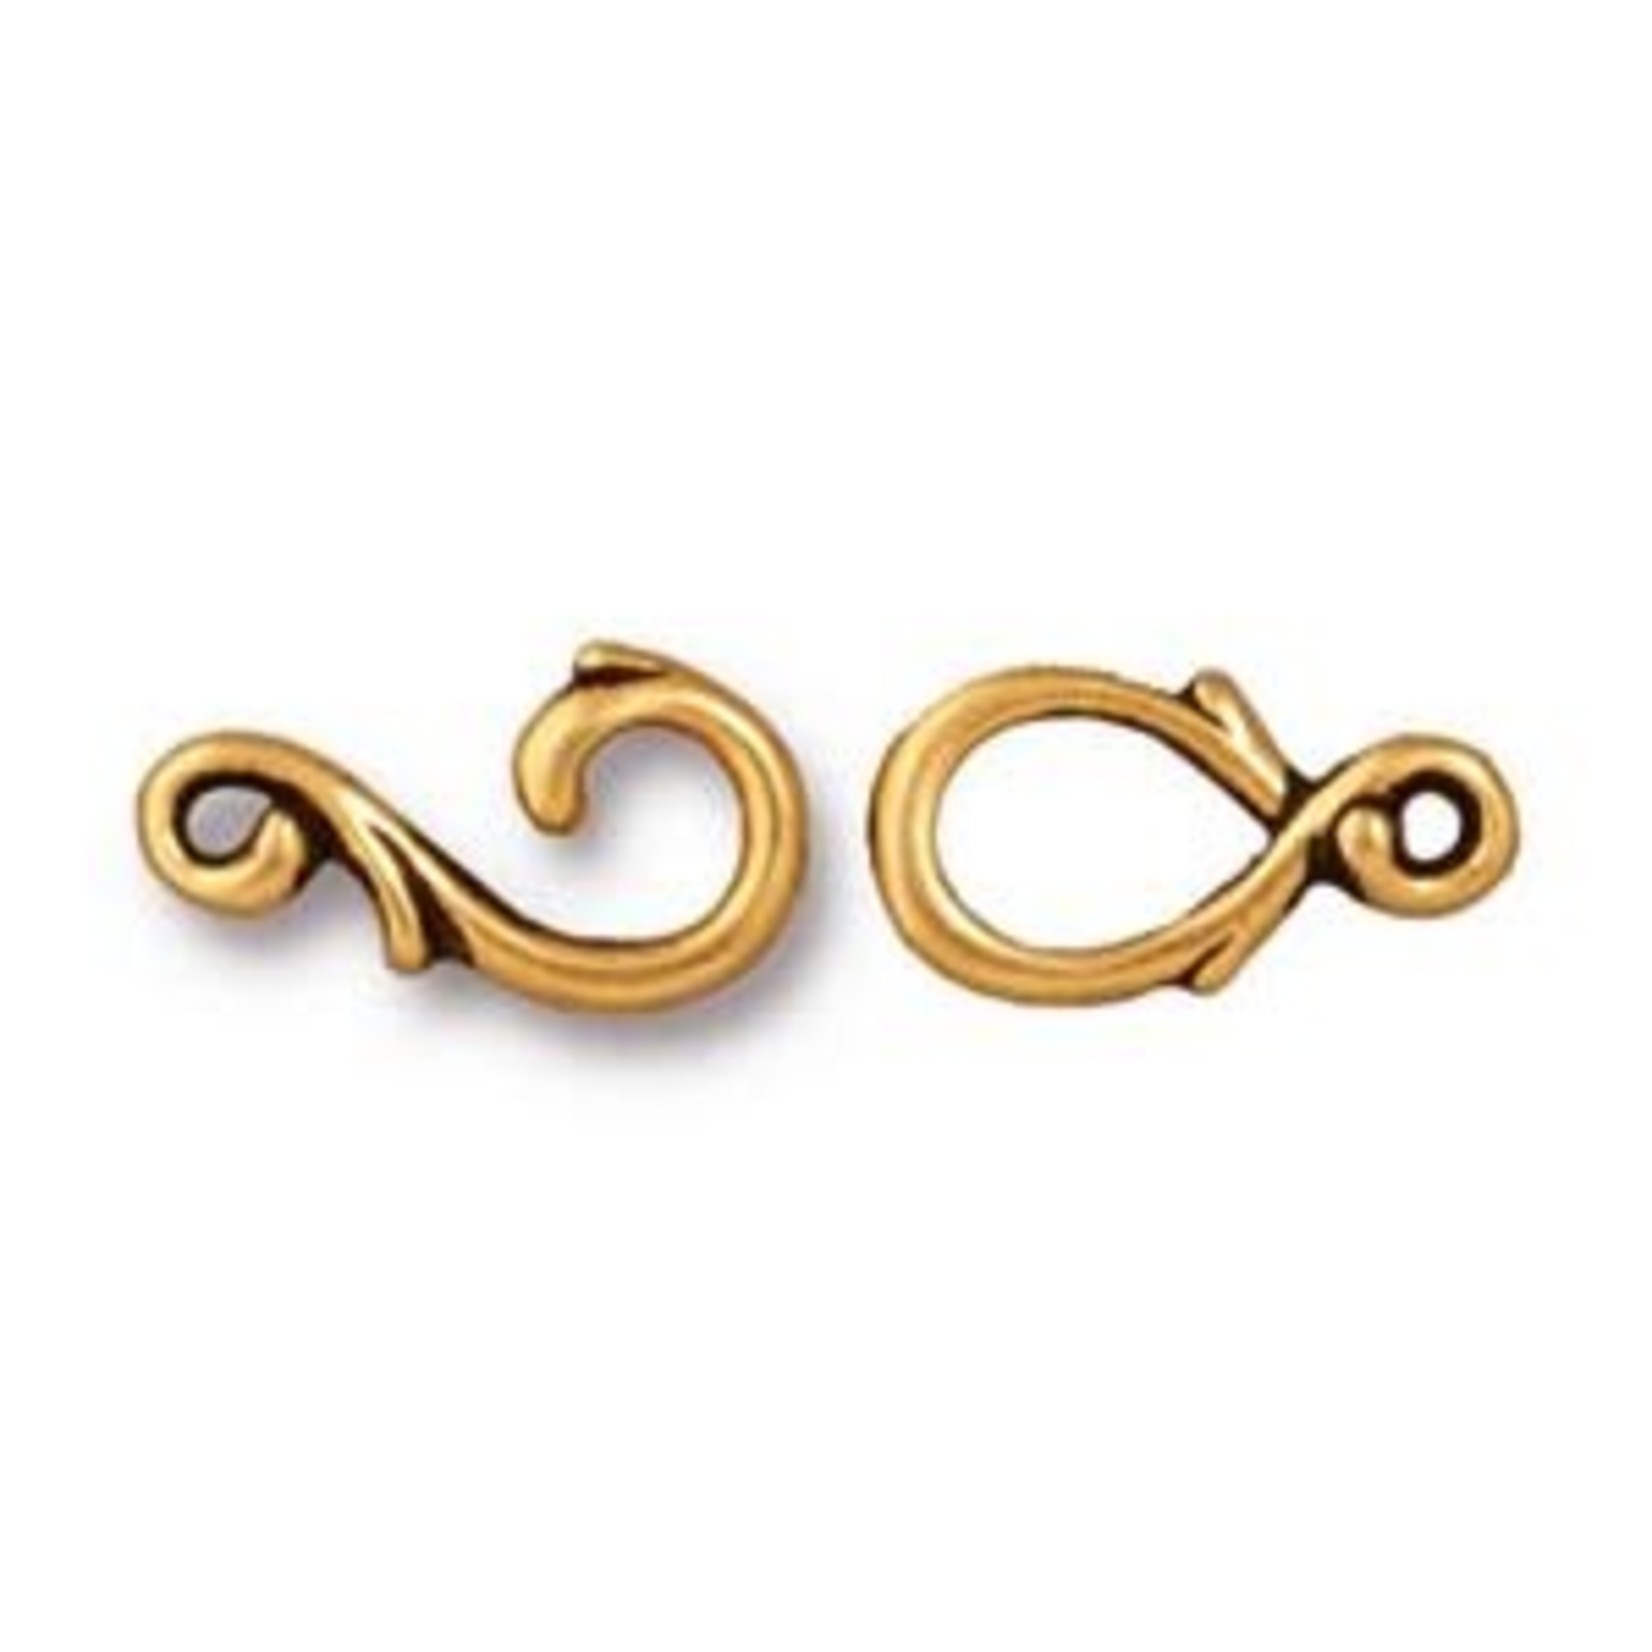 TierraCast Vine Hook and Eye Clasp Set - Antique Gold Plated